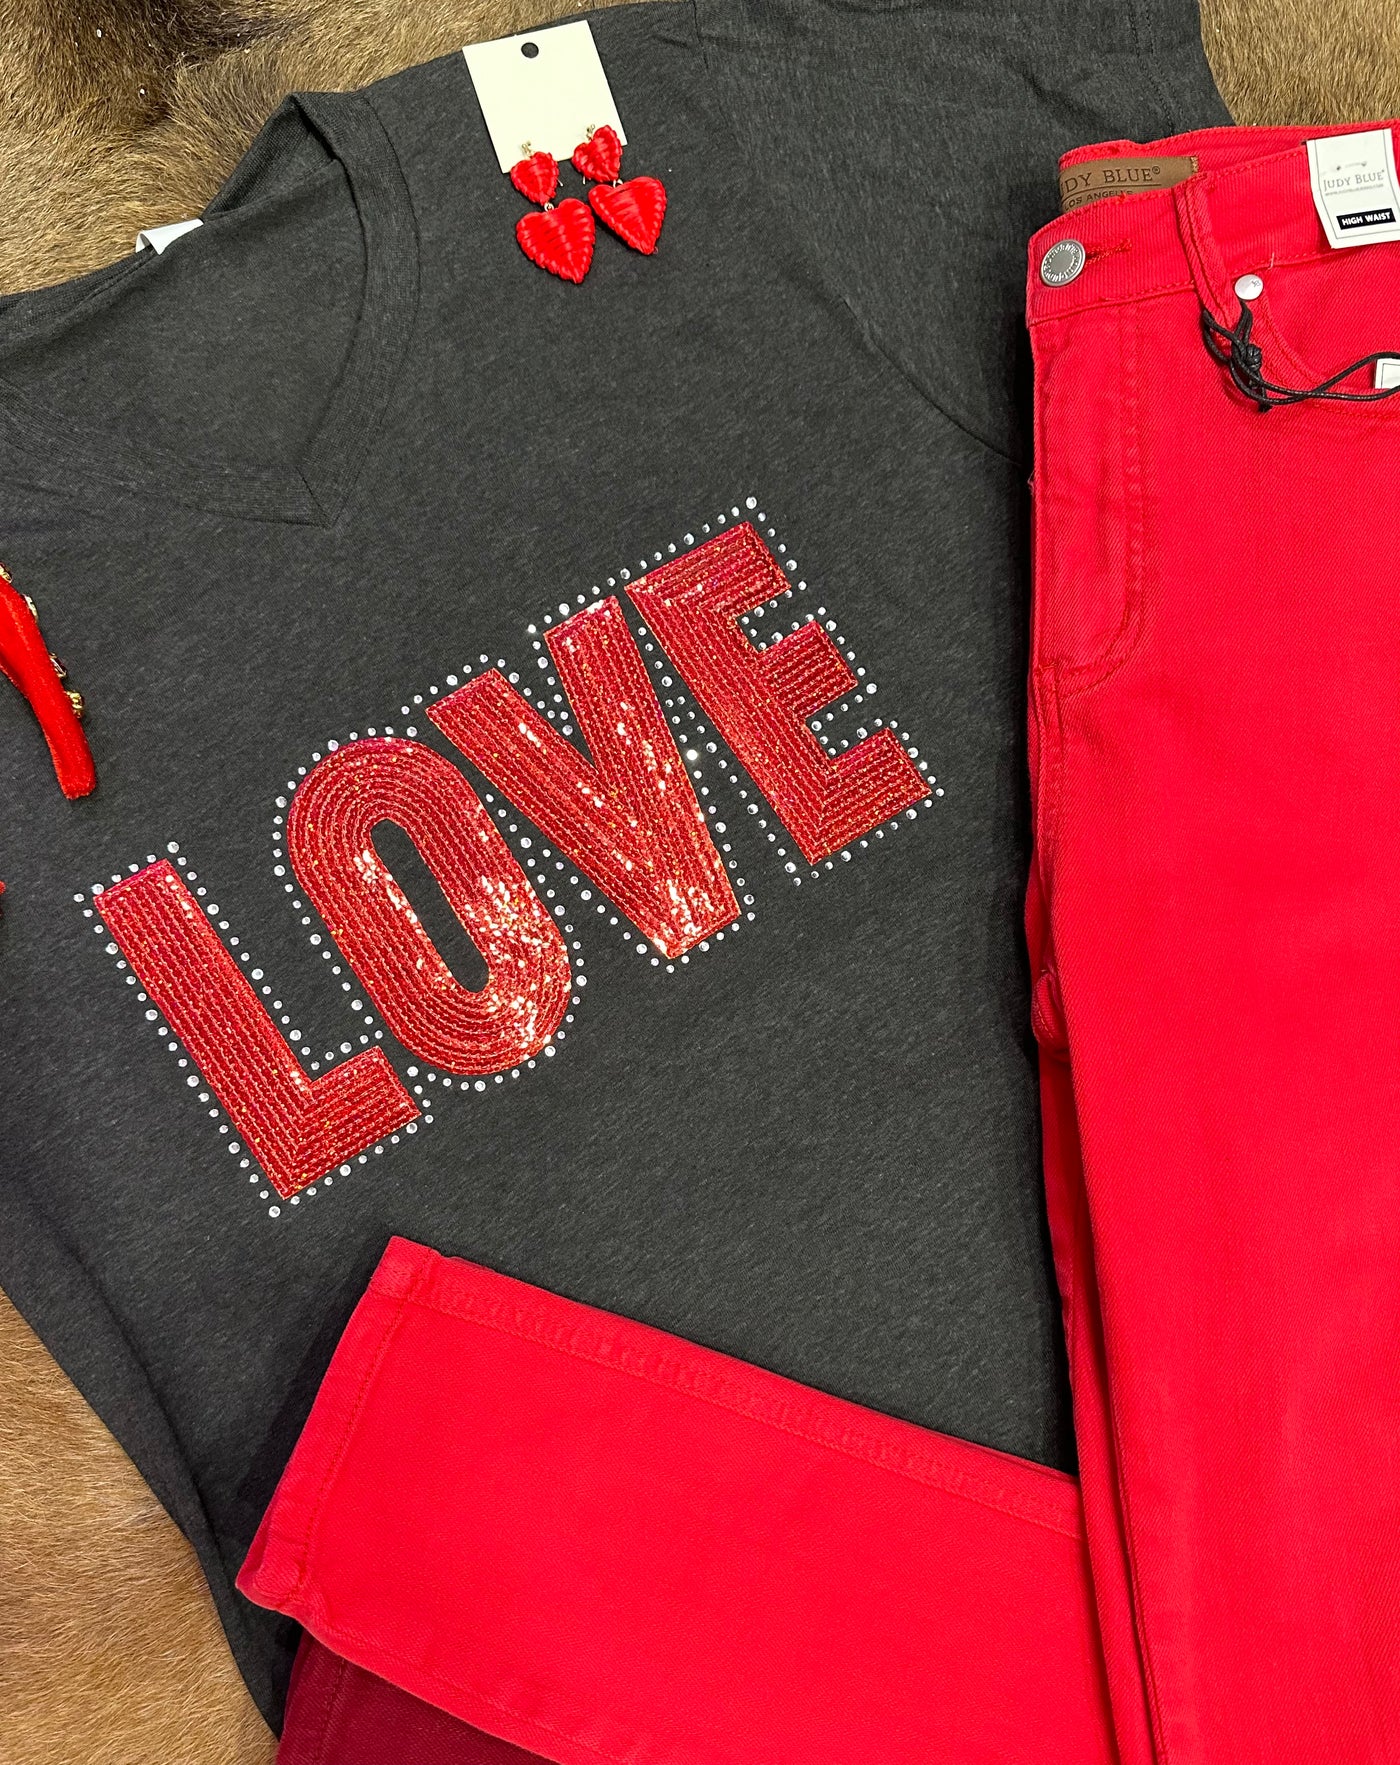 LOVE Sequined V-Neck Tee on Heather Charcoal